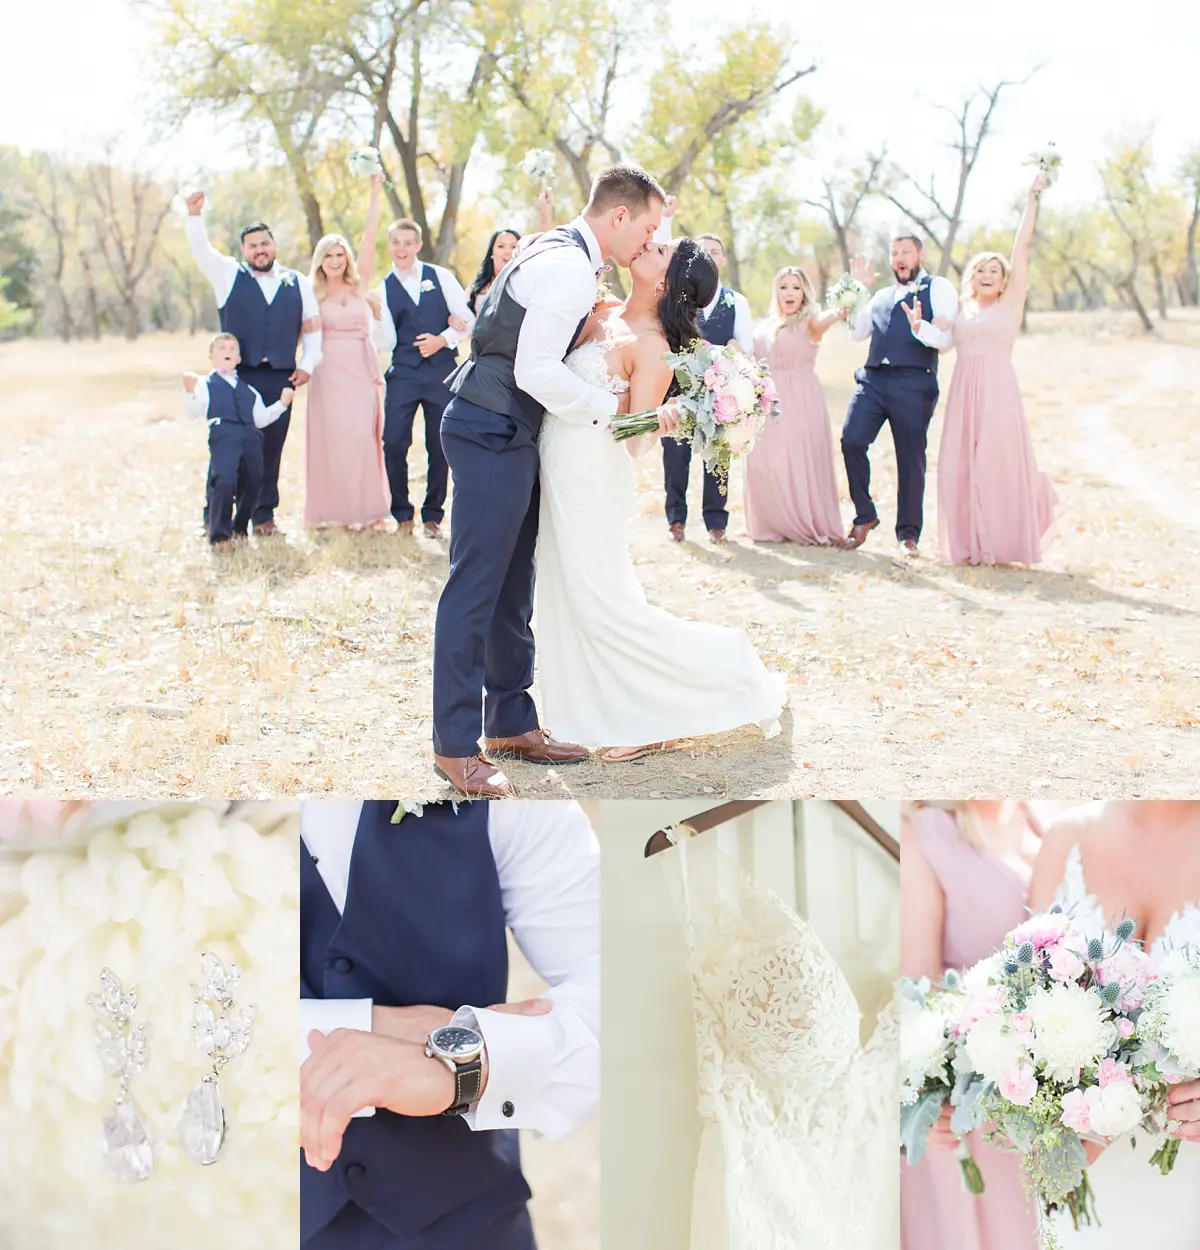 35+ Ideas For Dusty Rose And Navy Blue Wedding Reception